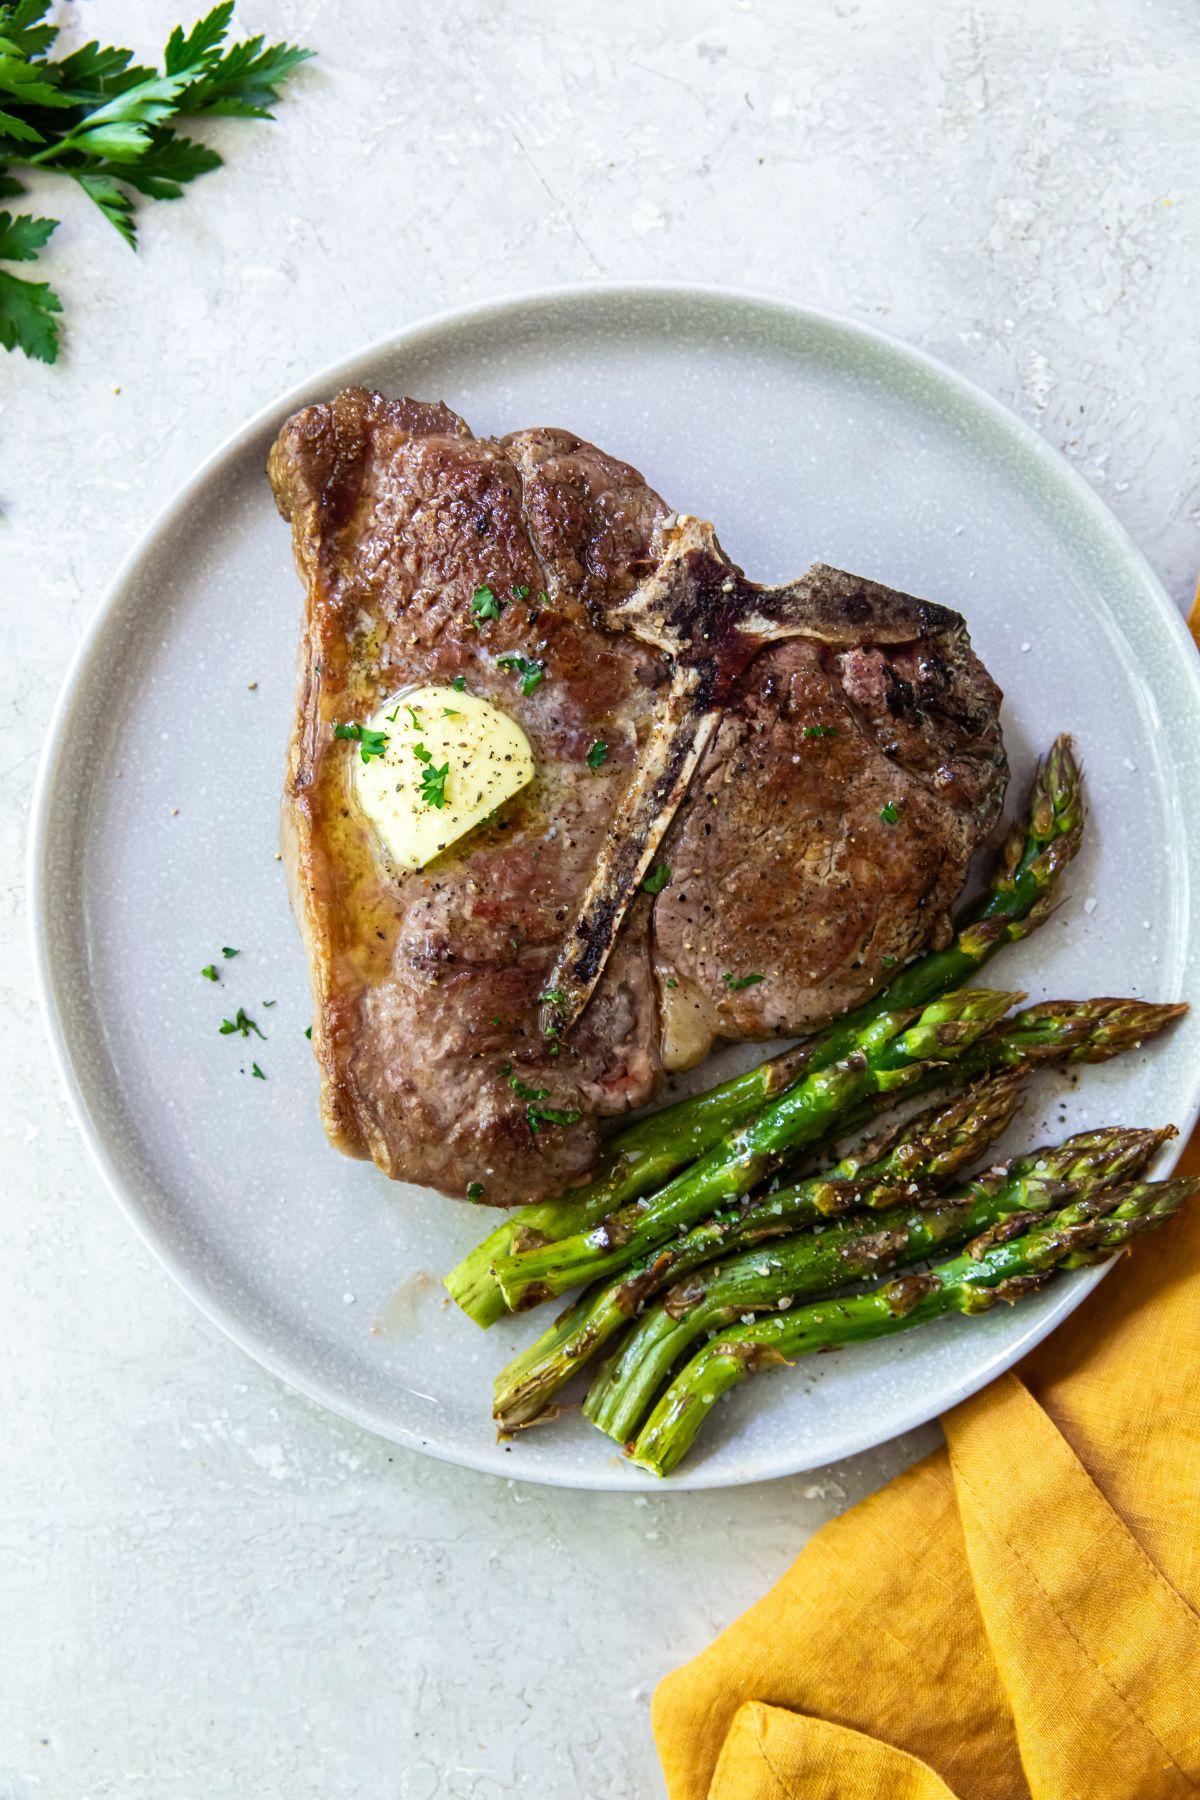 Steak with asparagus and butter on a plate.